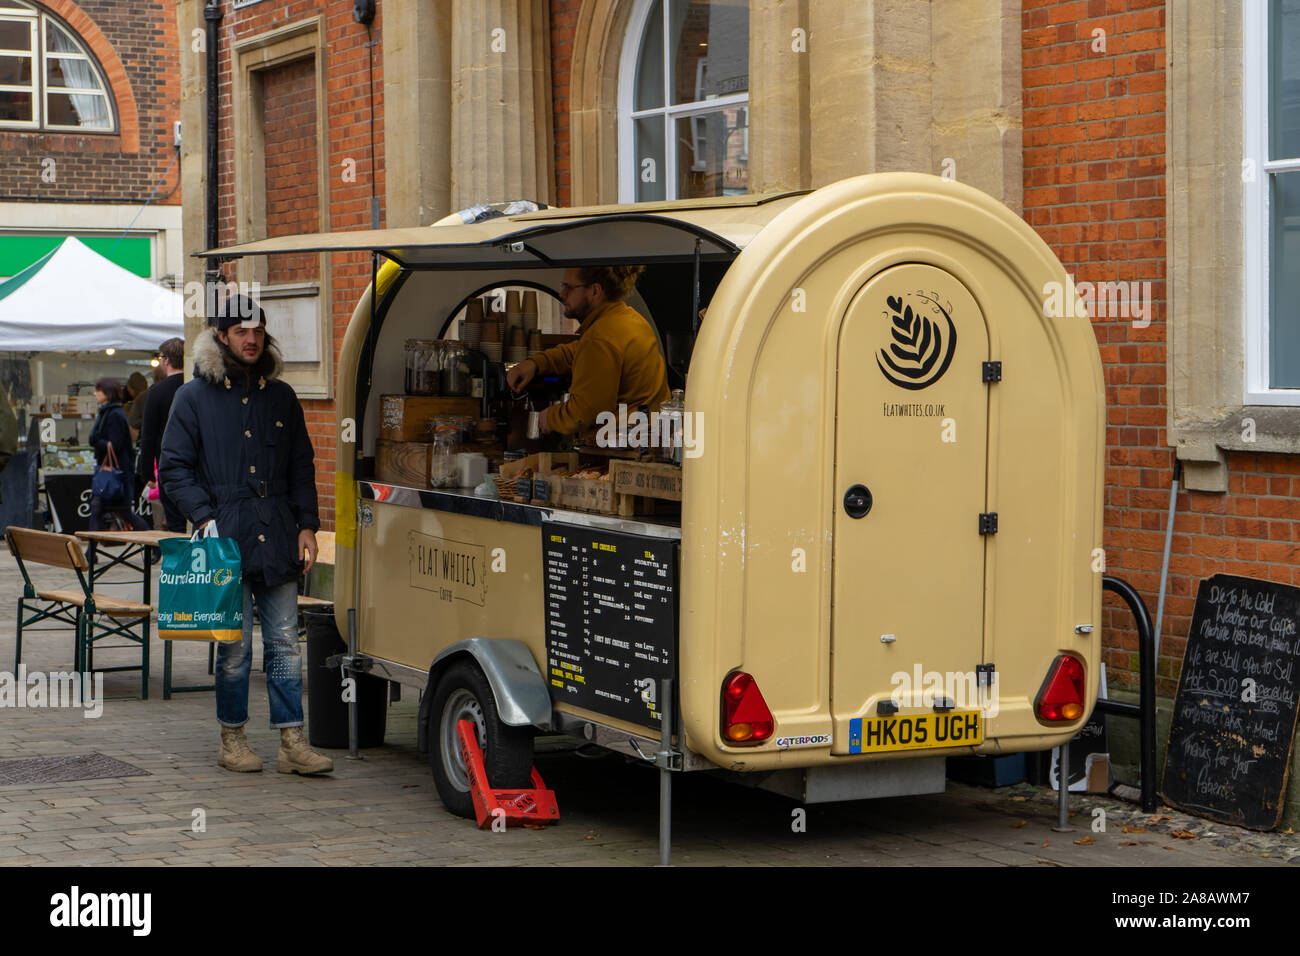 A Barista serving coffee to a man from an artisan coffee shop or mobile coffee stand Stock Photo